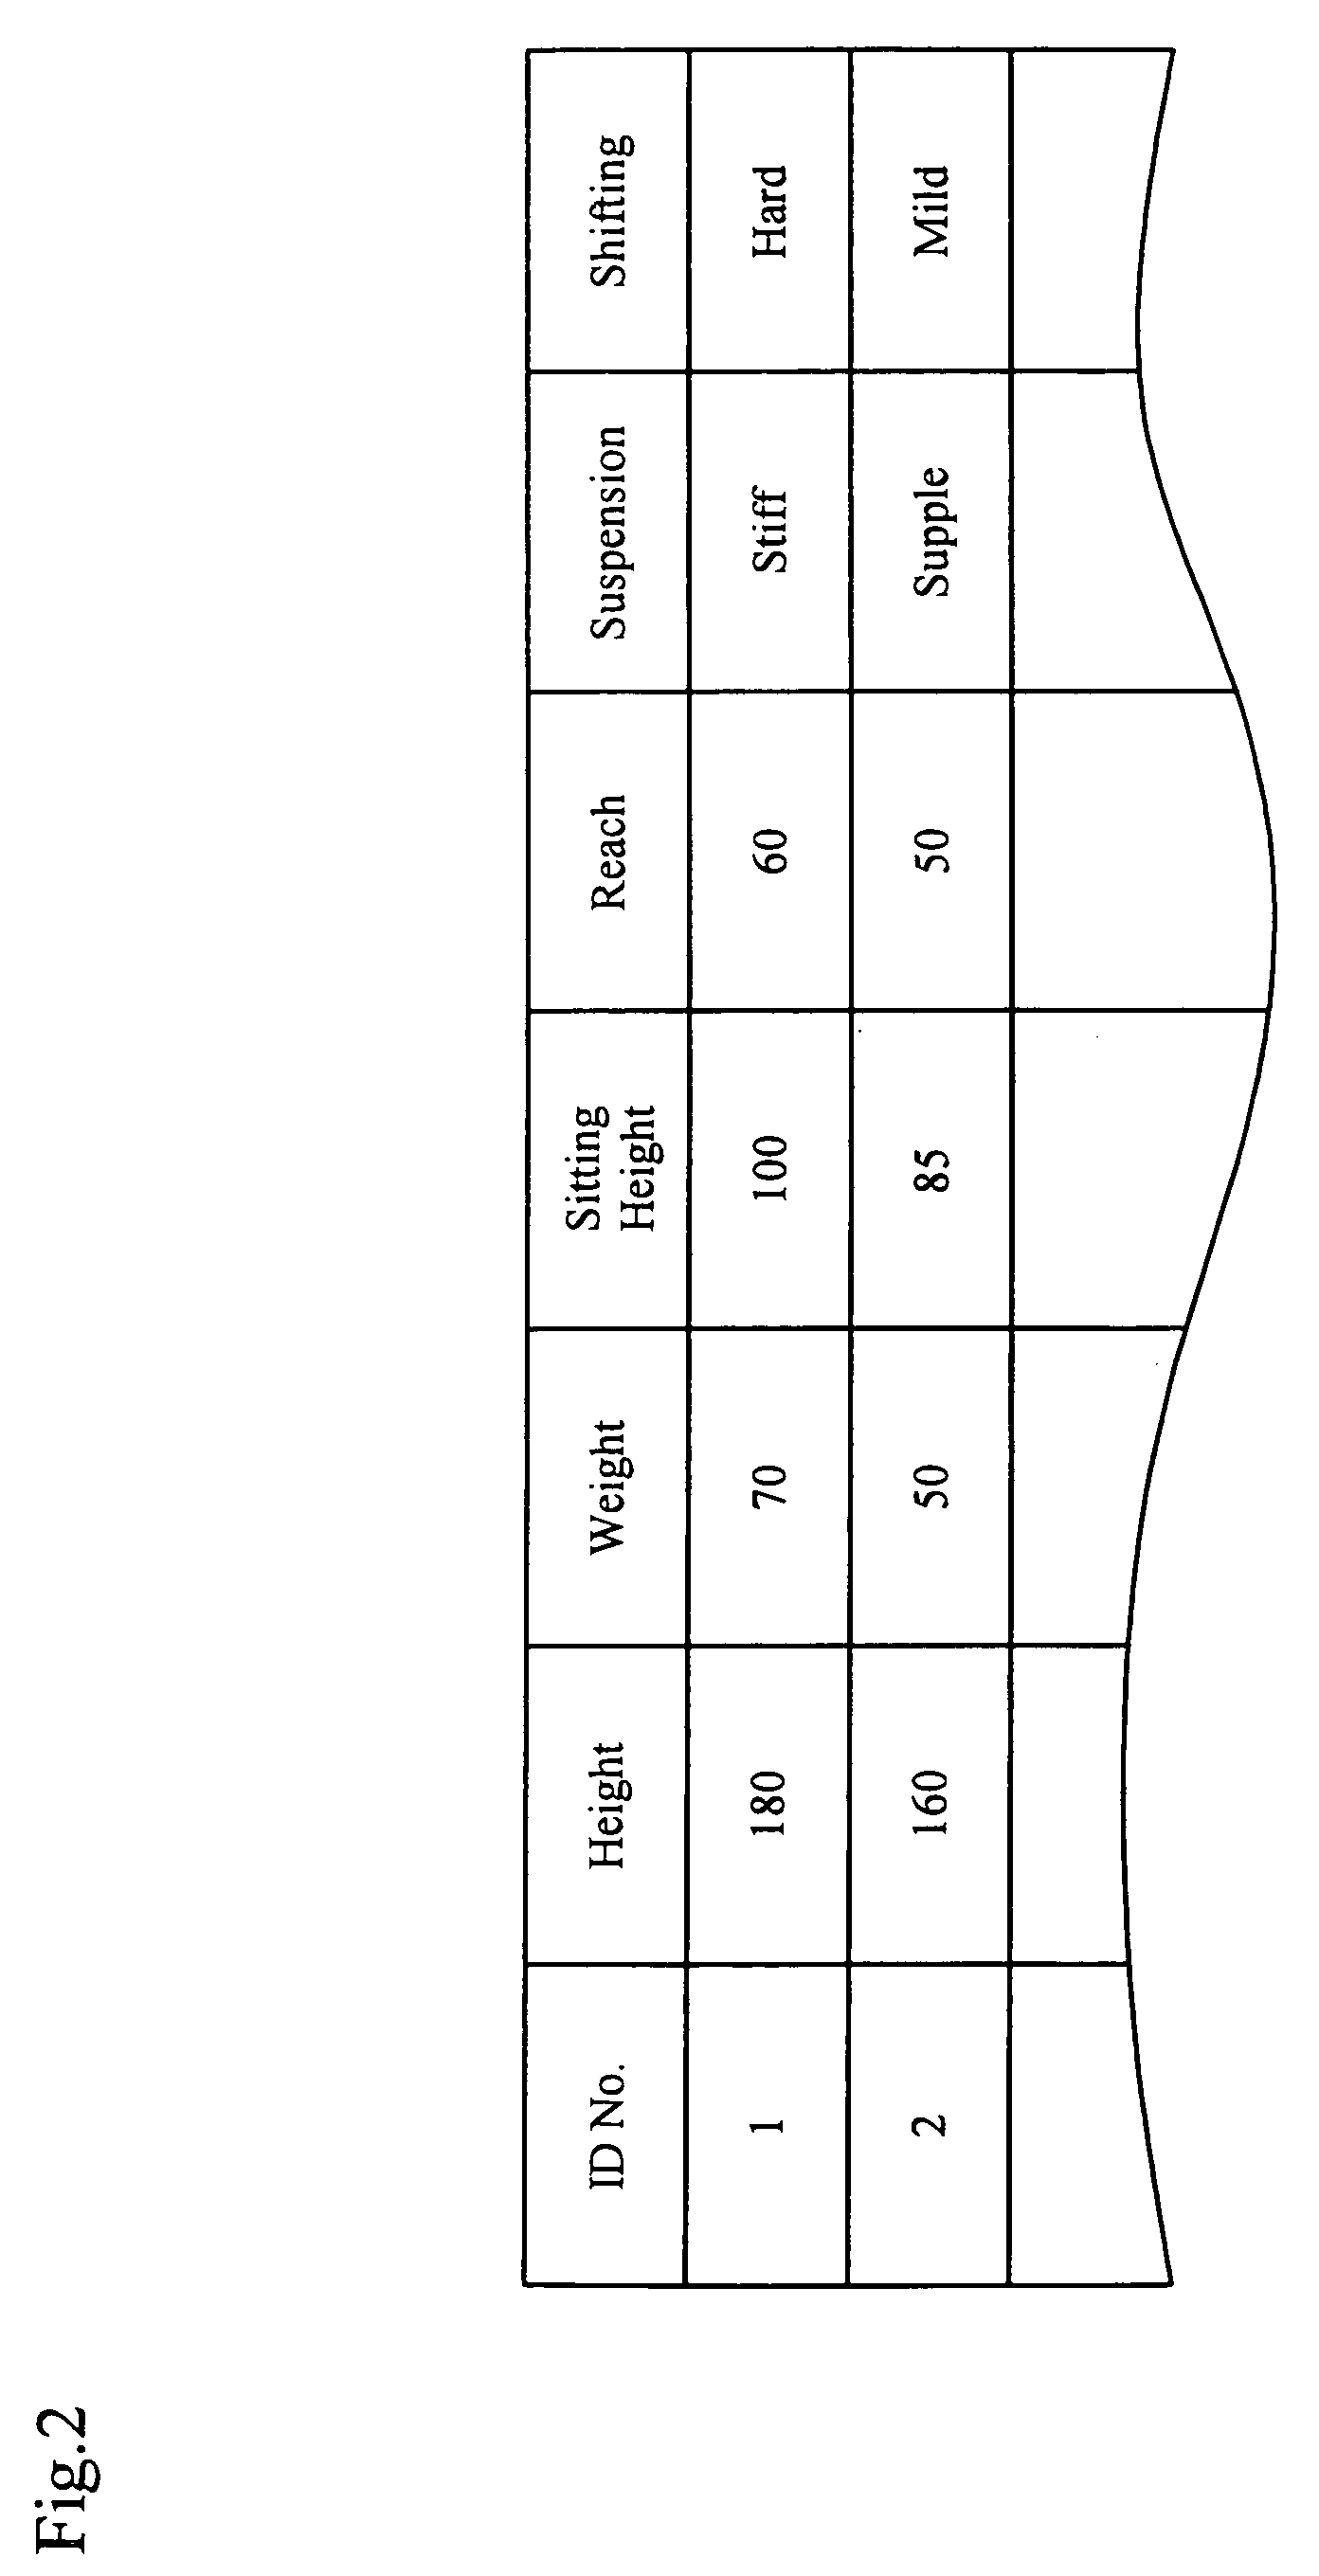 Vehicle environment control device